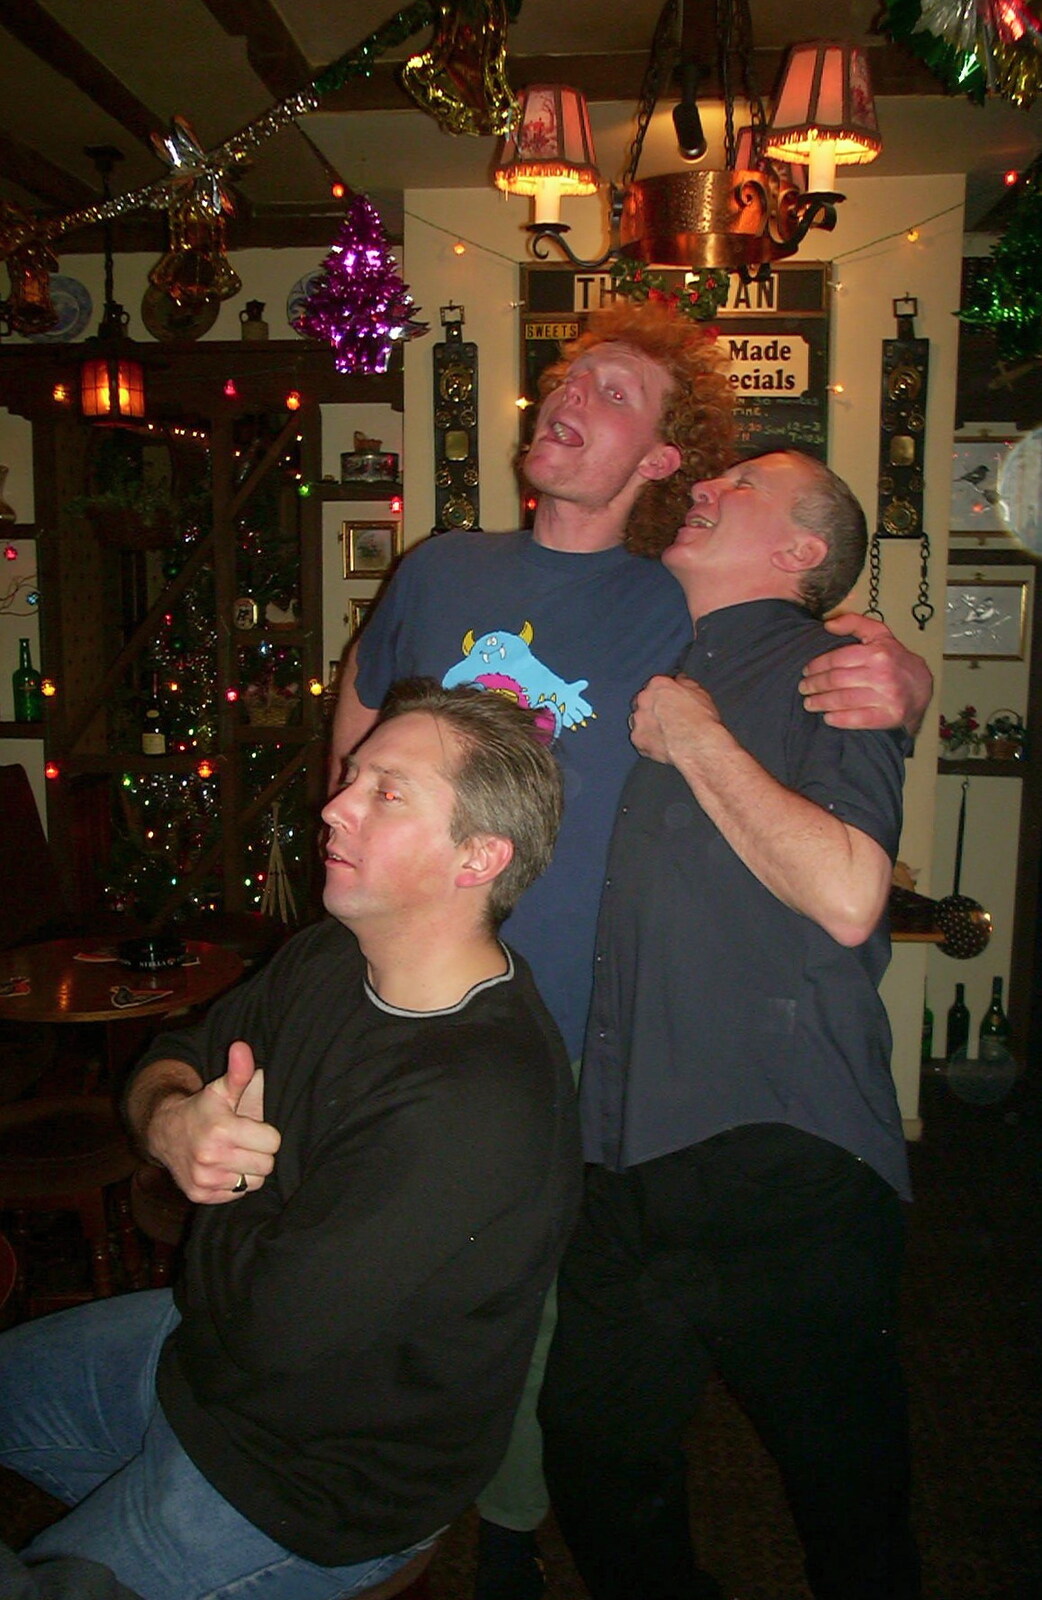 New Year's Eve at the Swan Inn, Brome, Suffolk - 31st December 2002: Wavy and John Willy have a sing